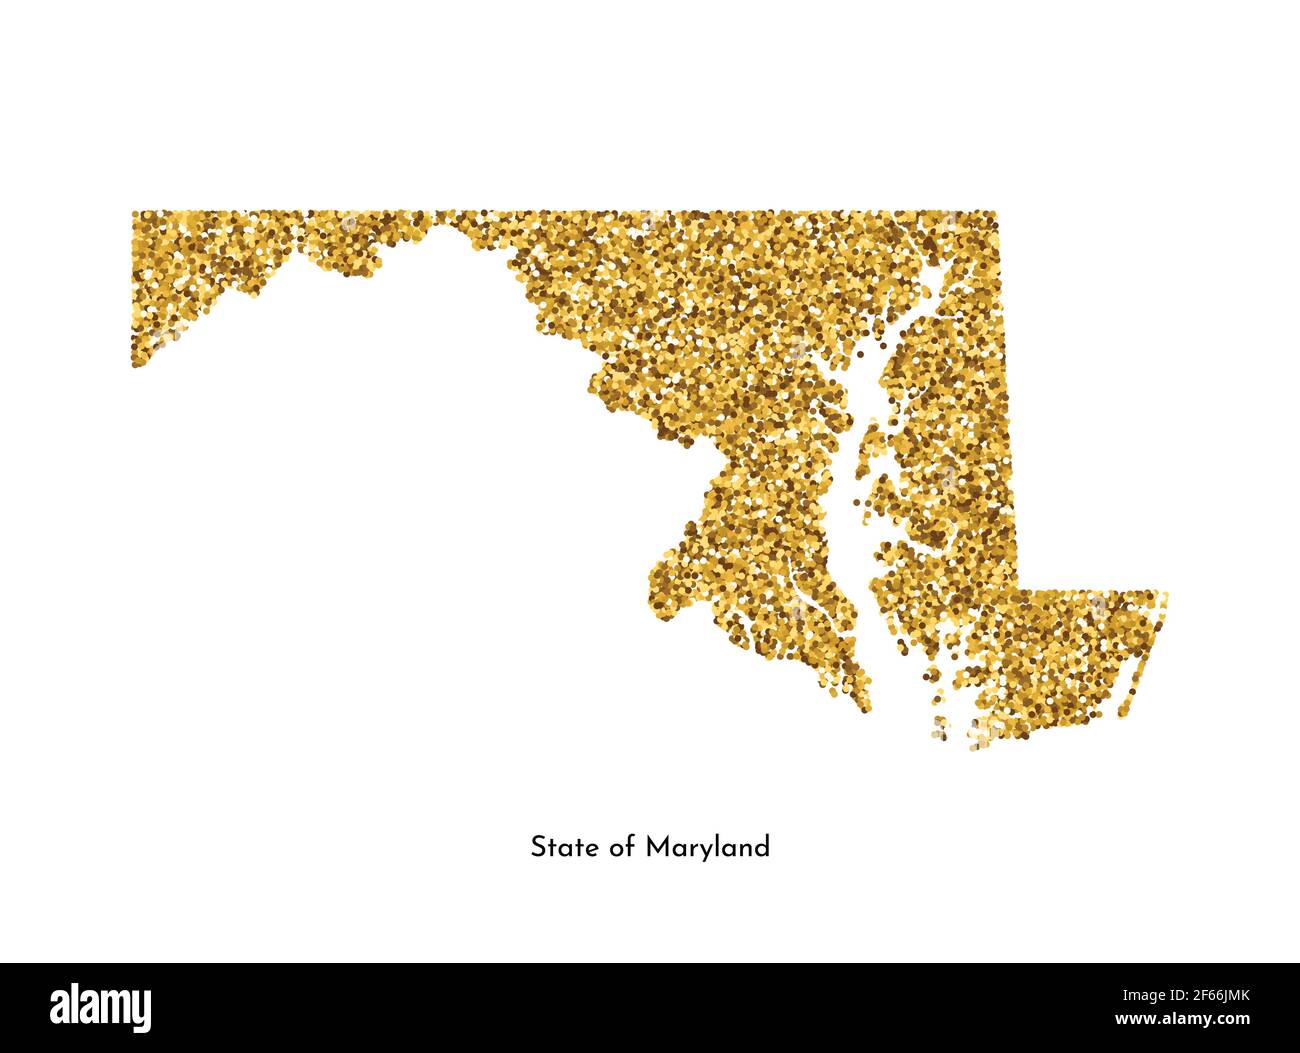 Vector isolated illustration with simplified map of State of Maryland (USA). Shiny gold glitter texture. Decoration template. Stock Vector